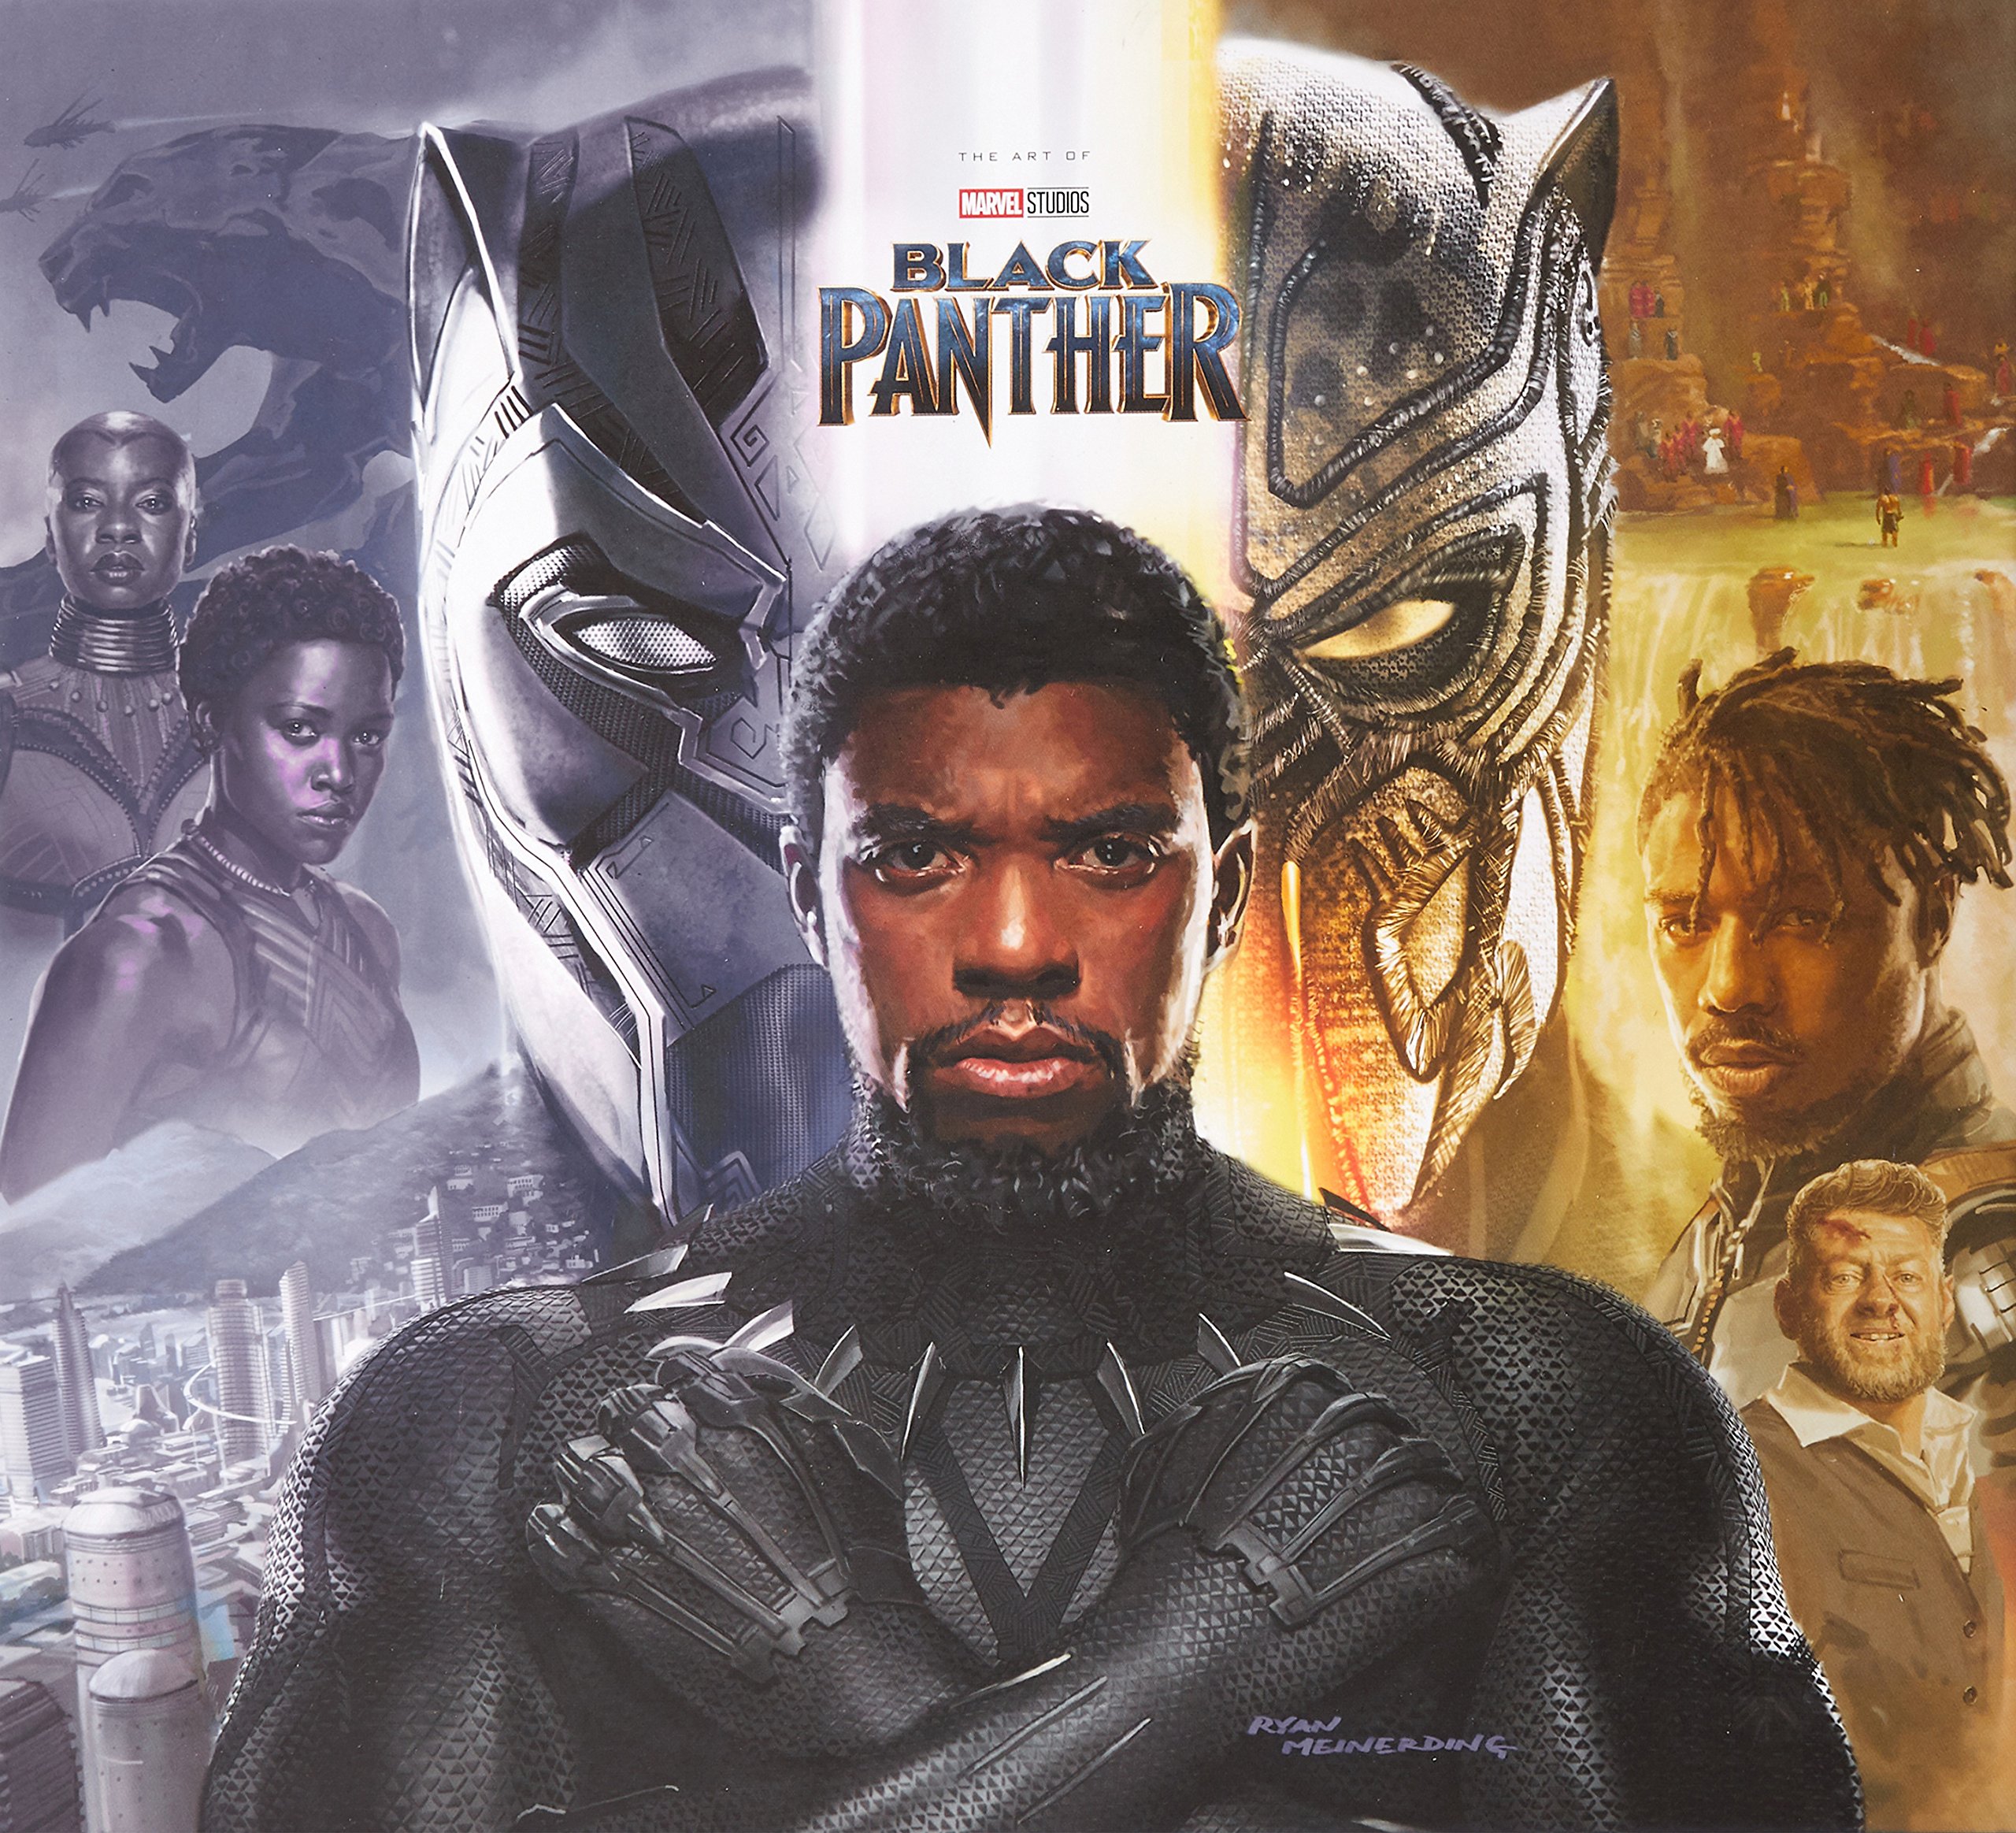 The Art of Black Panther ブラックパンサーアートブック-